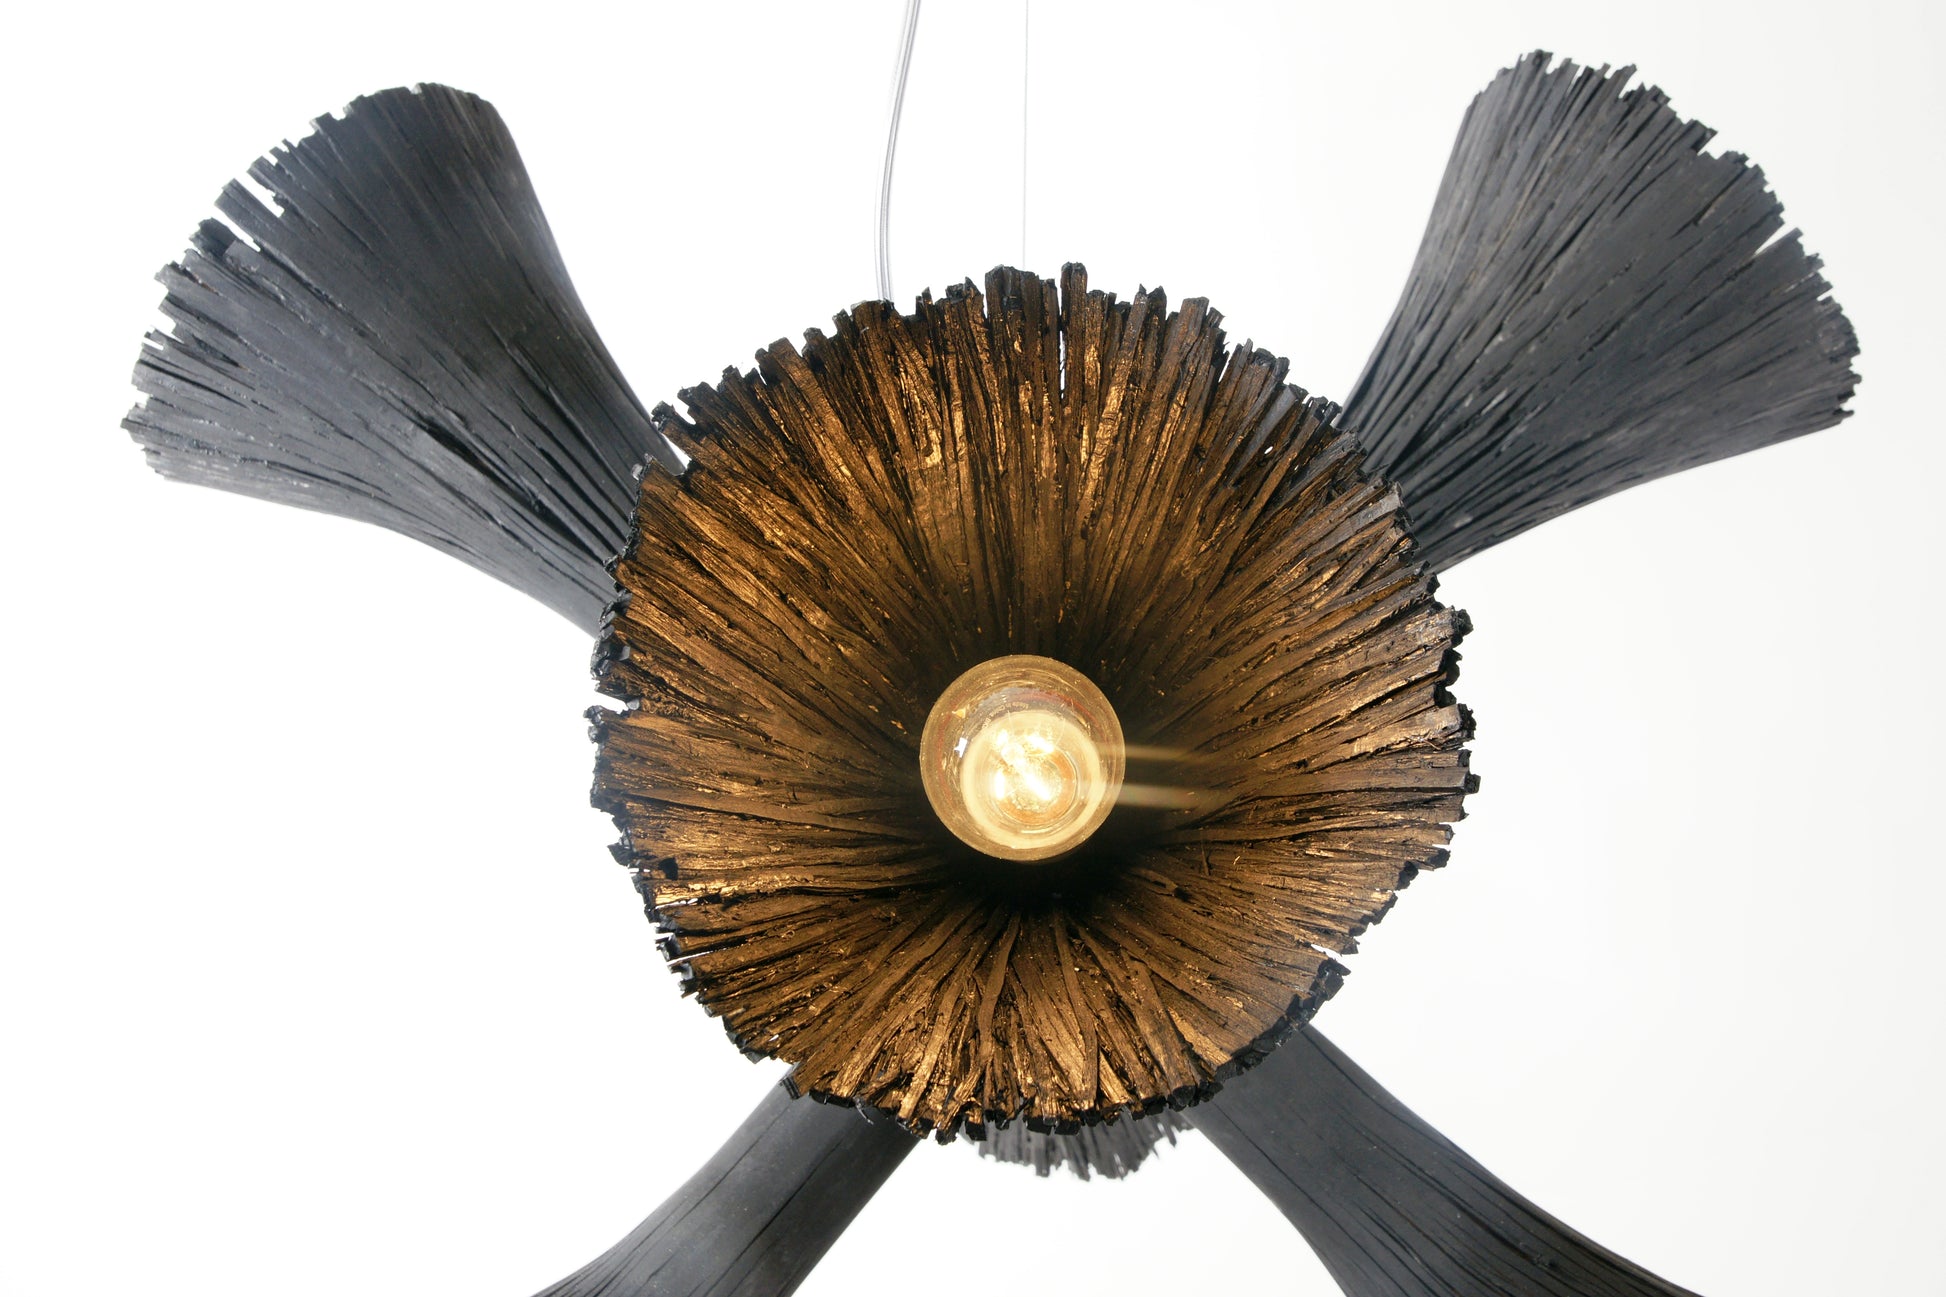 Pressed Wood Chandelier, close up view 